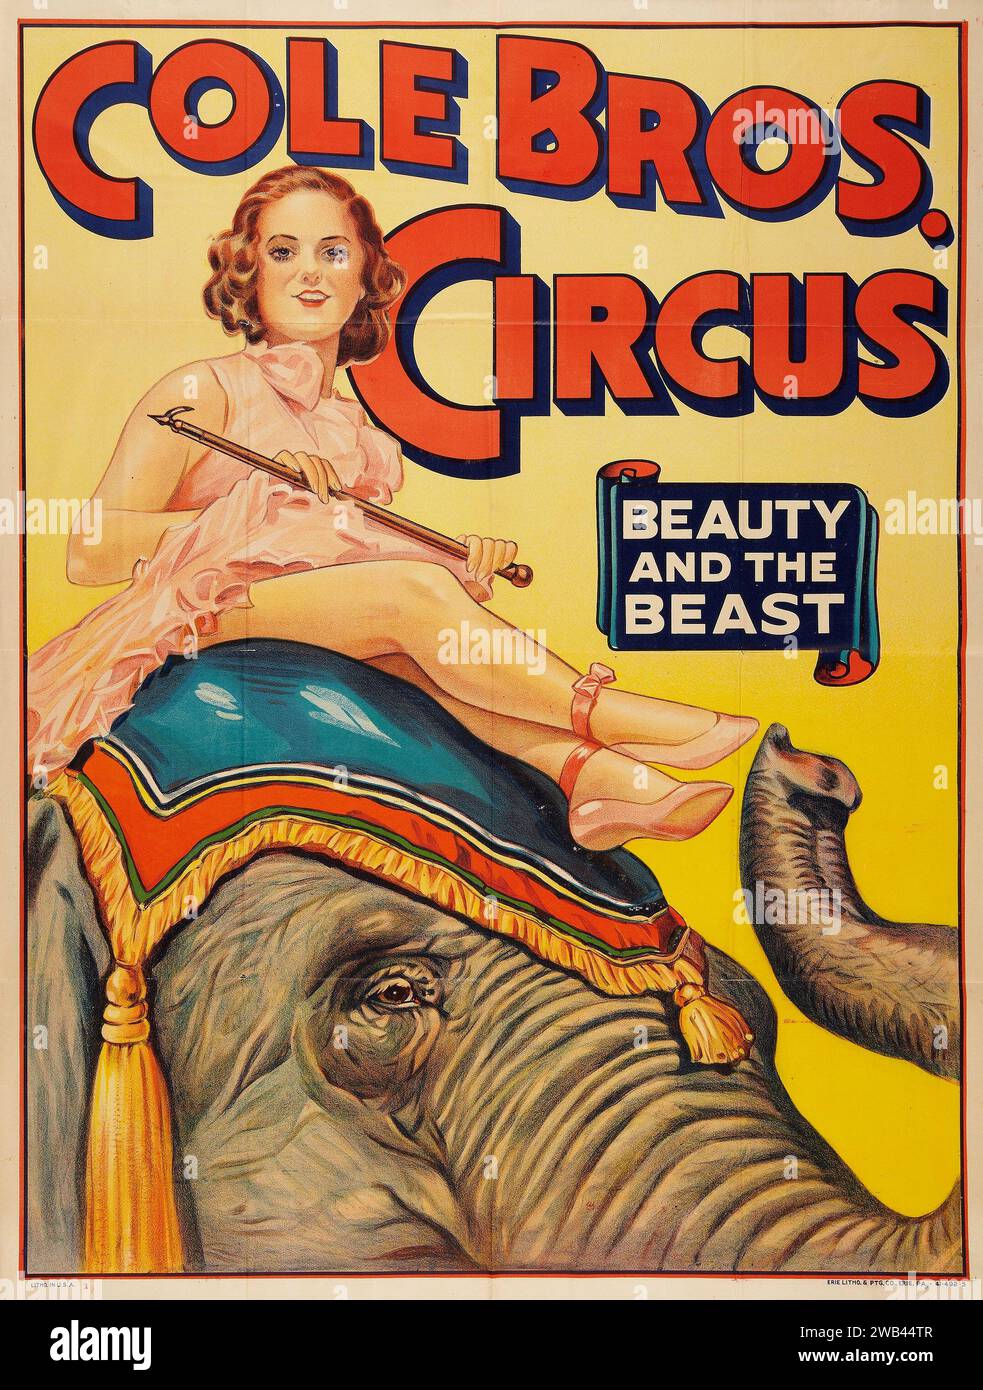 Circus Poster (Cole Brothers, 1930s) Beauty and the beast - woman riding a circus elephant Stock Photo